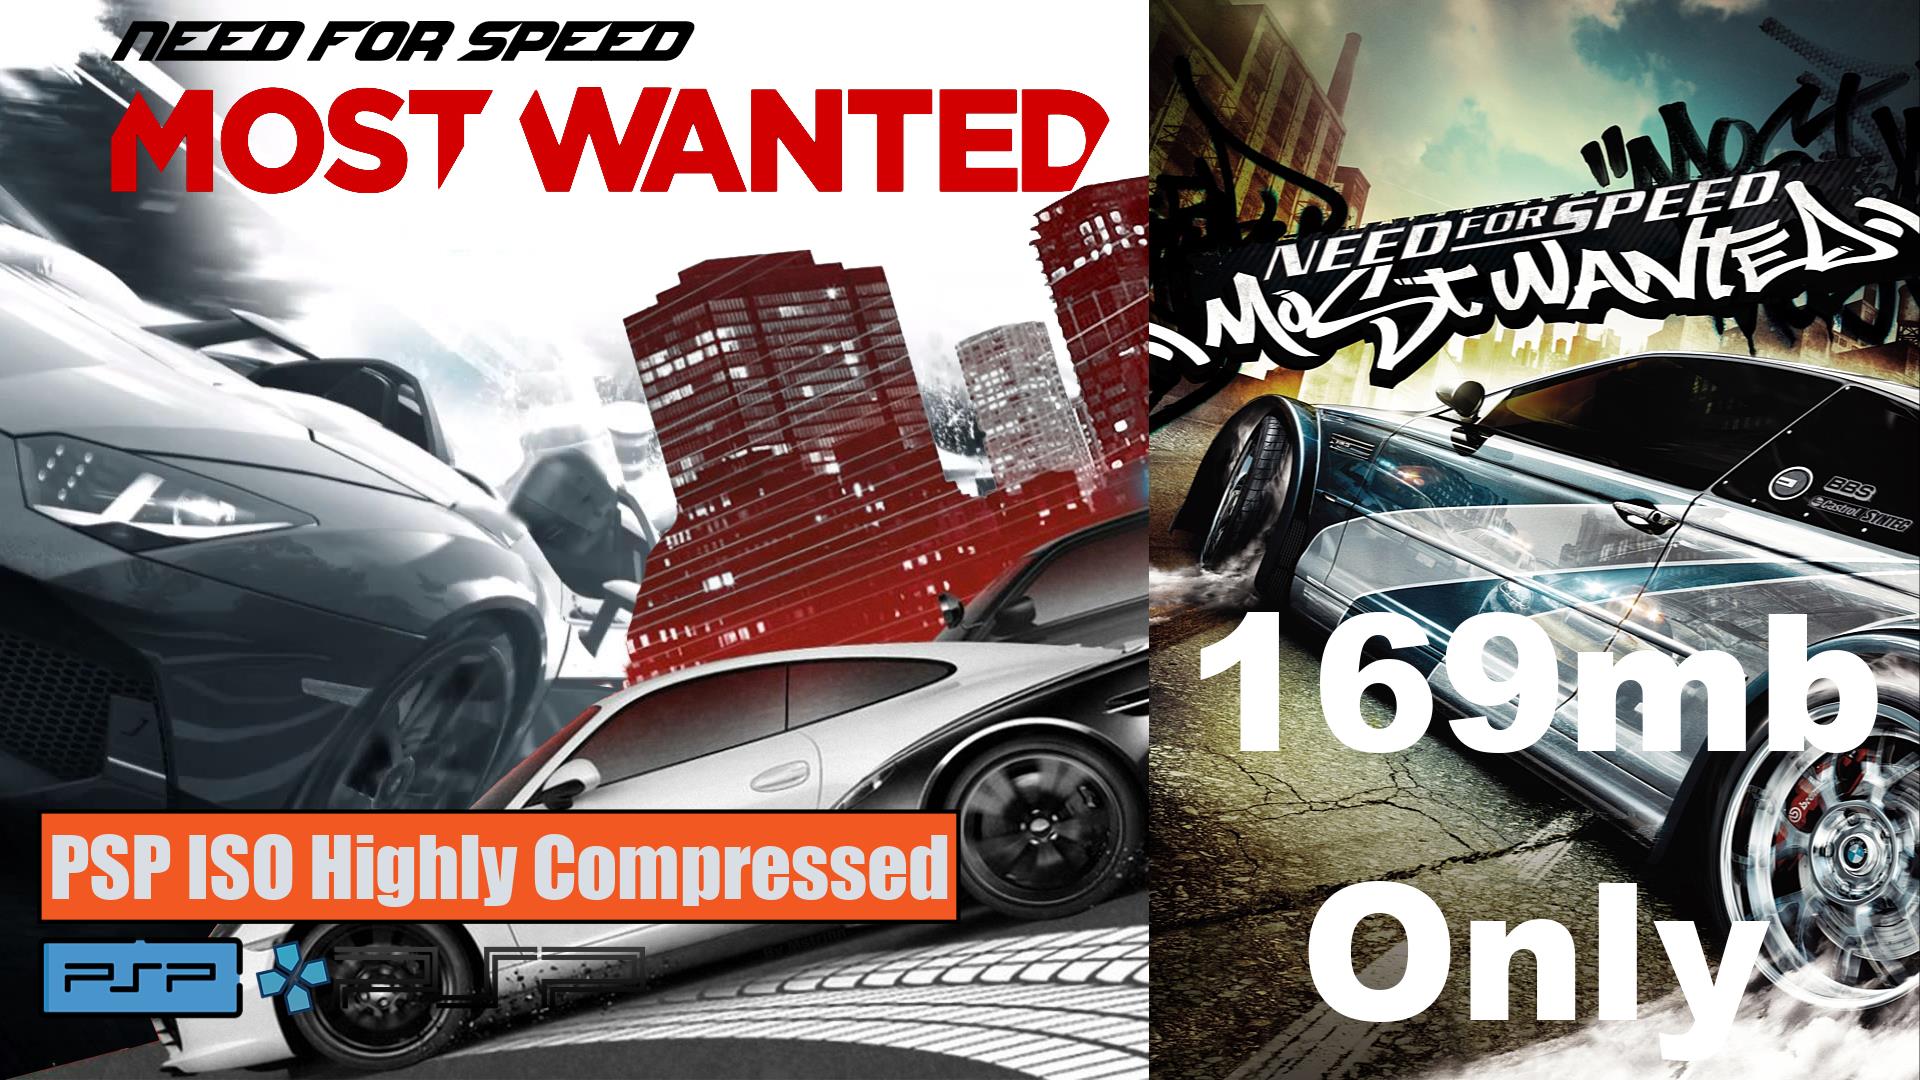 Need For Speed Most Wanted PPSSPP ISO Zip file Download Highly Compressed